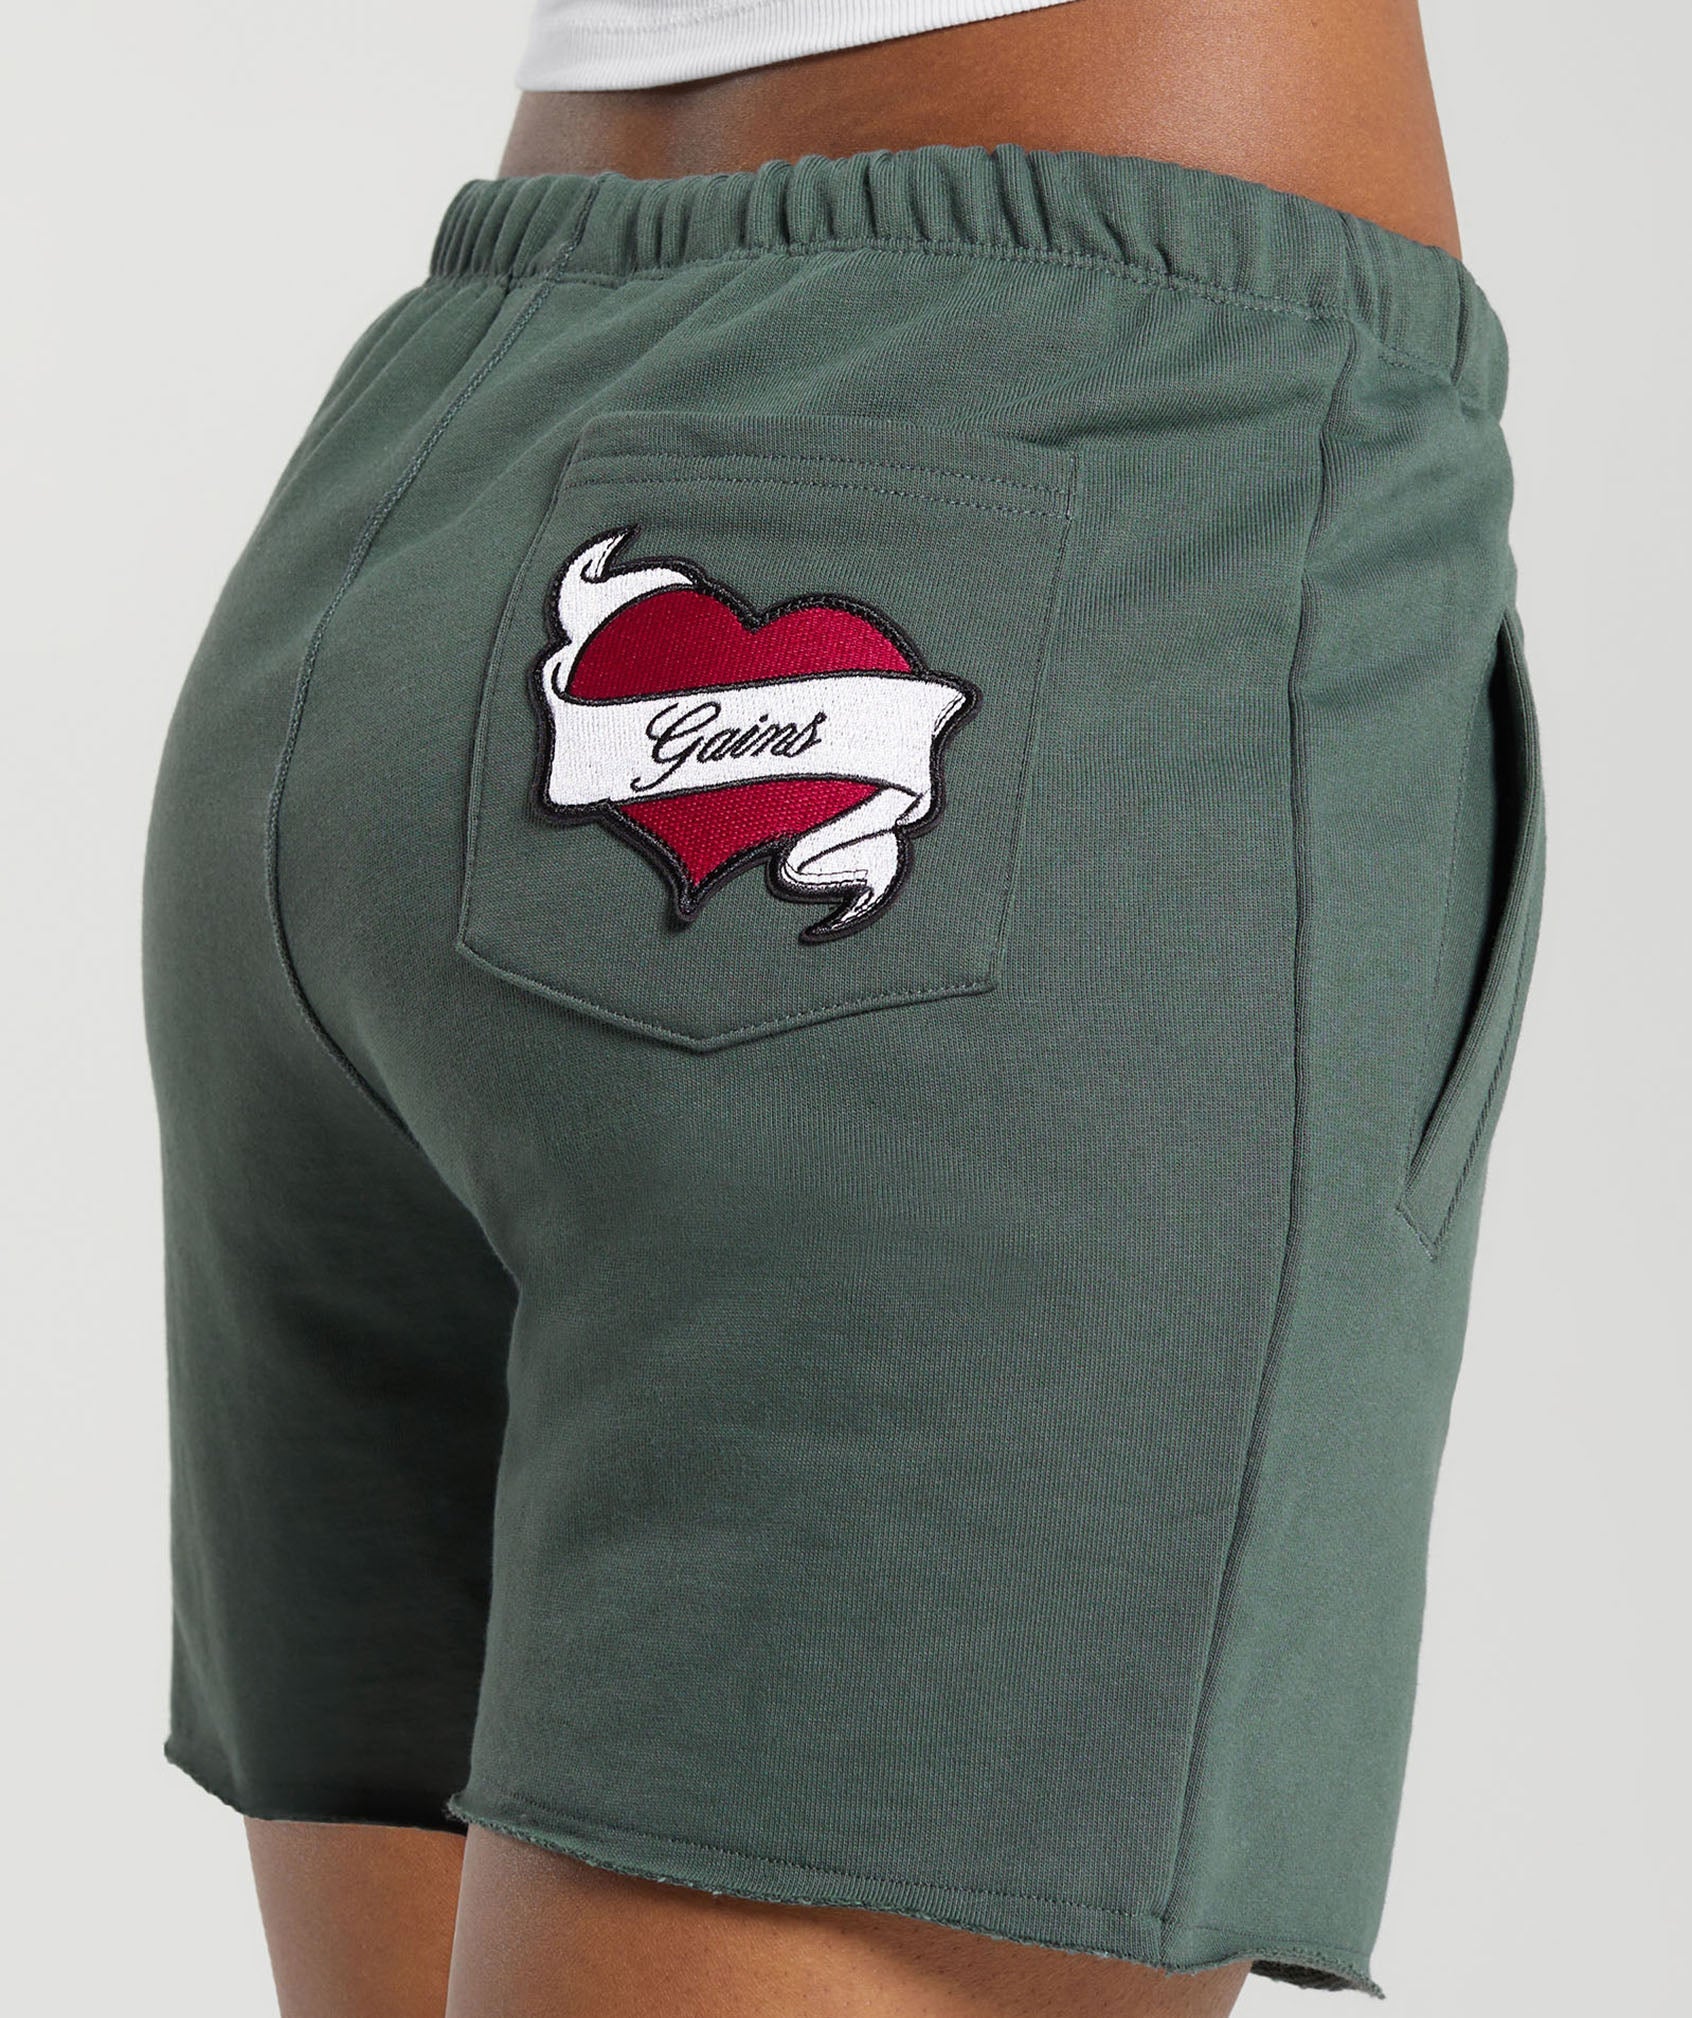 Tattoo Shorts in Slate Teal - view 5